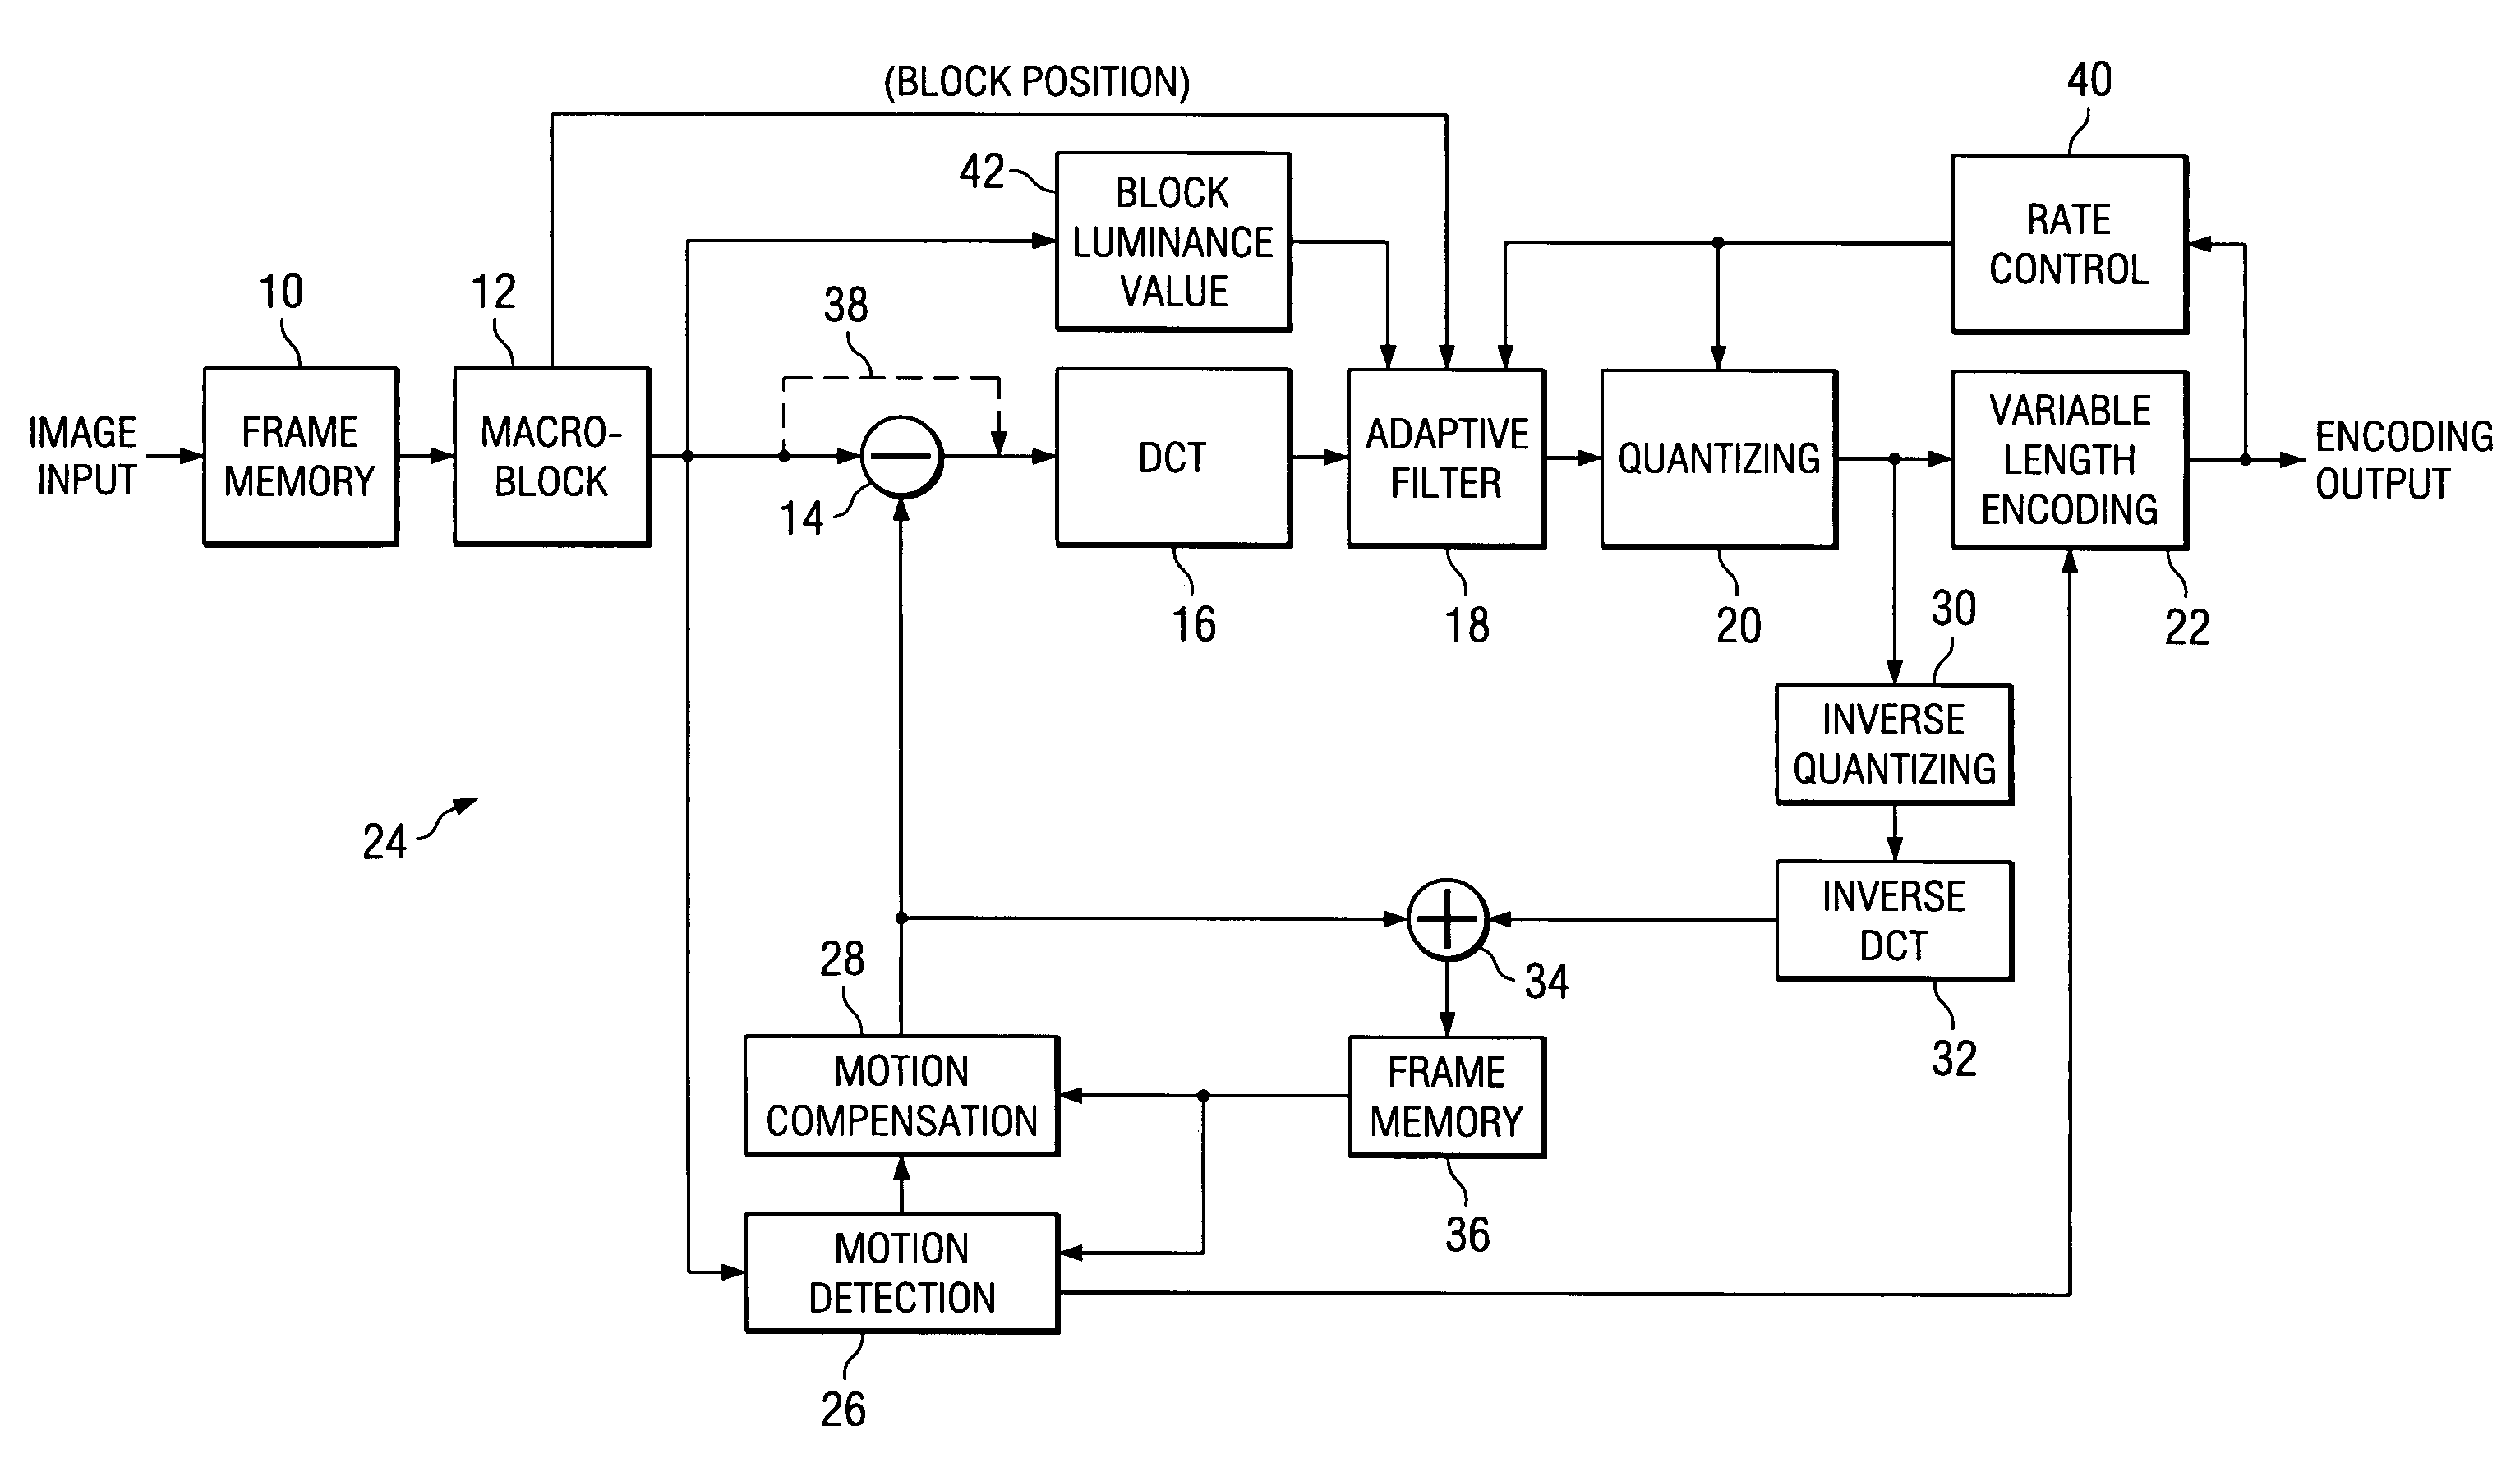 Image information compression device